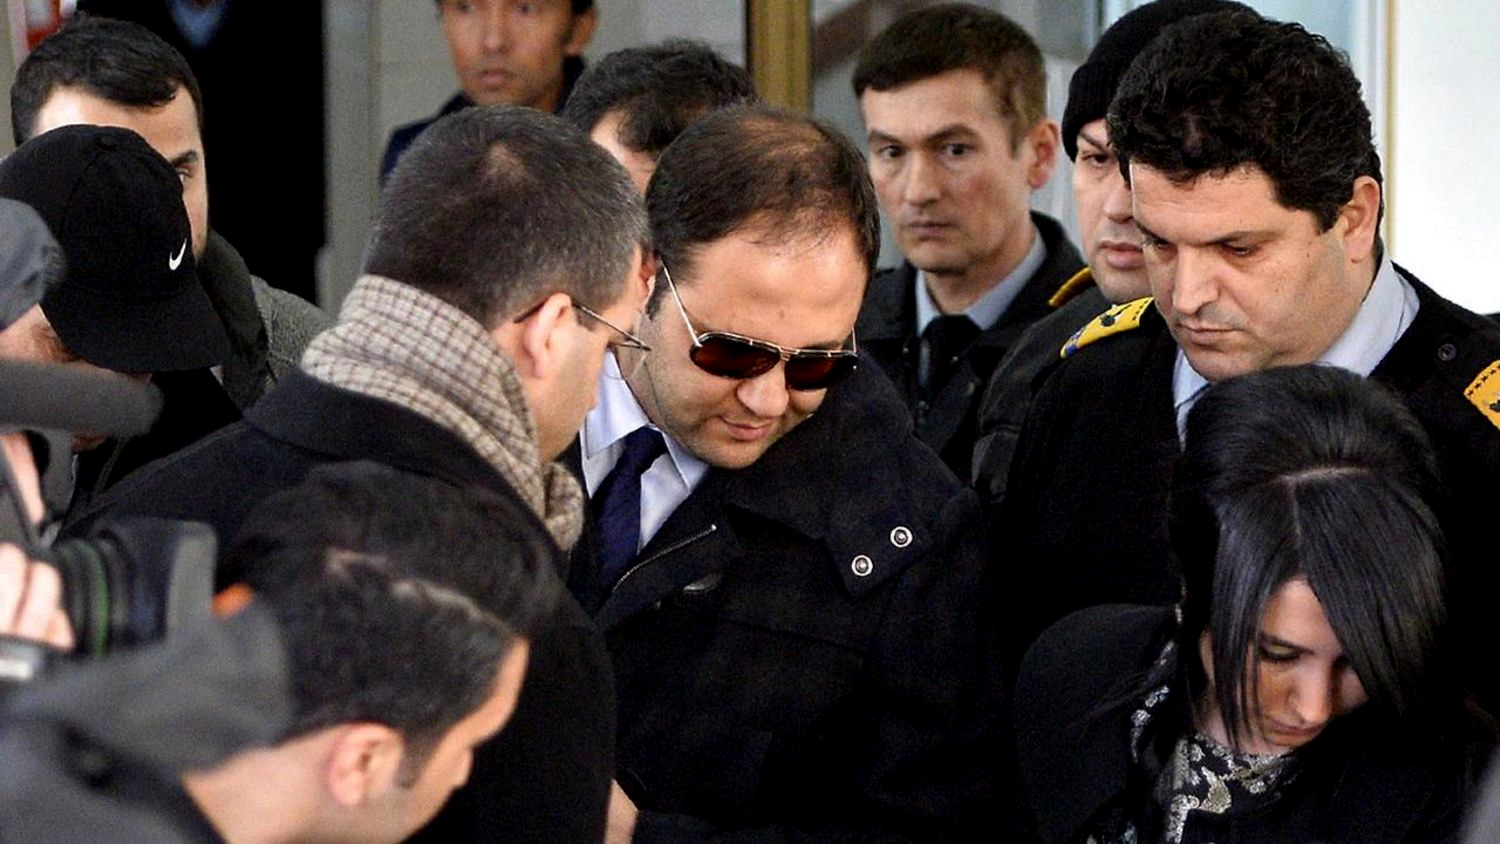 Turkish police arrest Baris Gule, the son of domestic minister Muammer Guler in connection with a major corruption case. (Photo: Atilgan Özdil/Berlingske)